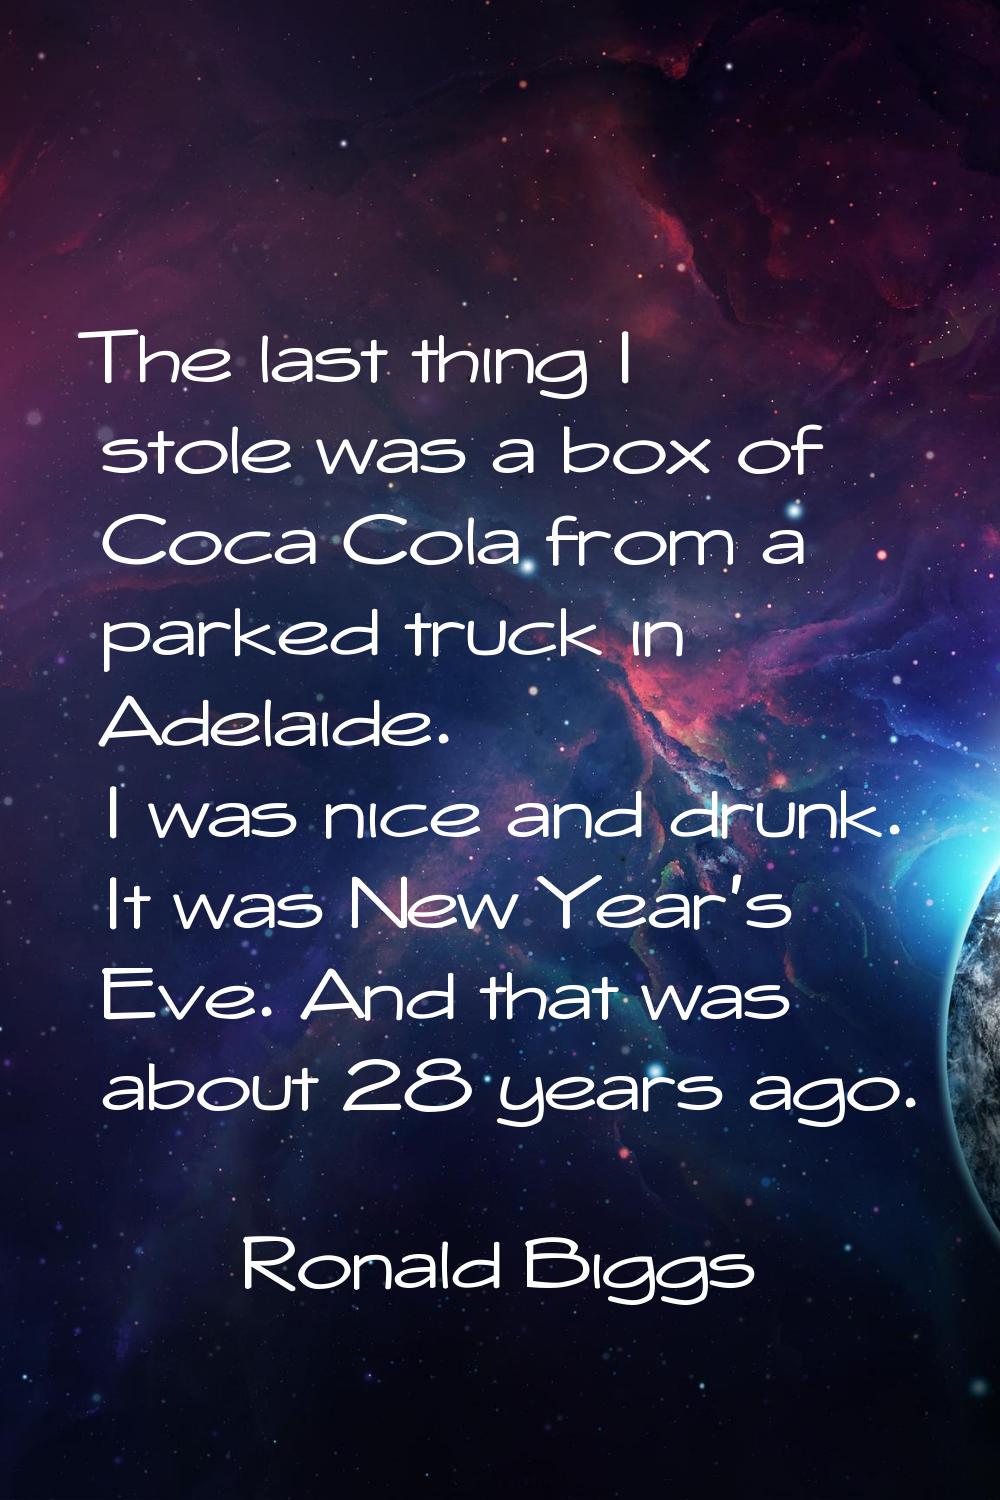 The last thing I stole was a box of Coca Cola from a parked truck in Adelaide. I was nice and drunk